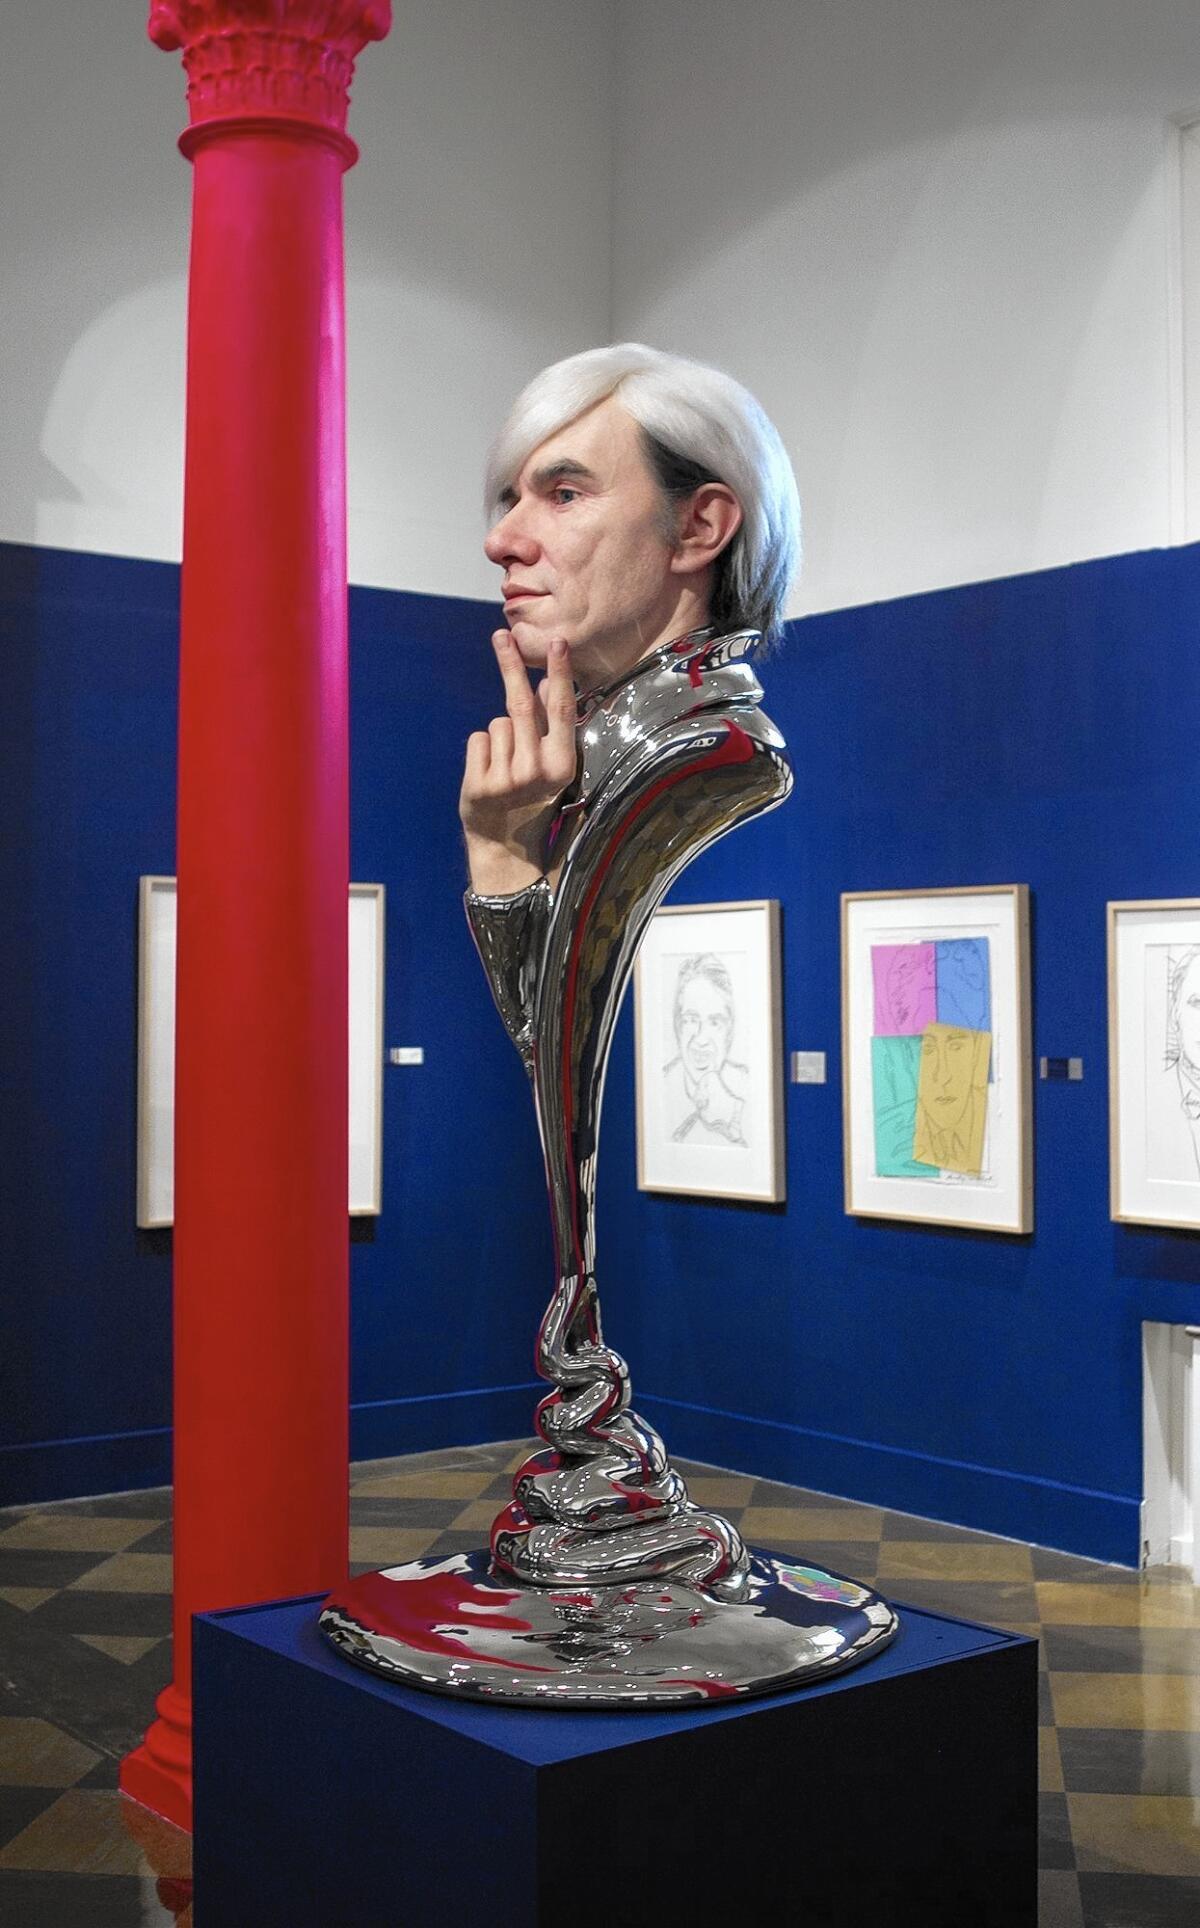 A large bust of Any Warhol at "The Late Drawings of Andy Warhol 1973-1987" at the Fullerton Museum Center.